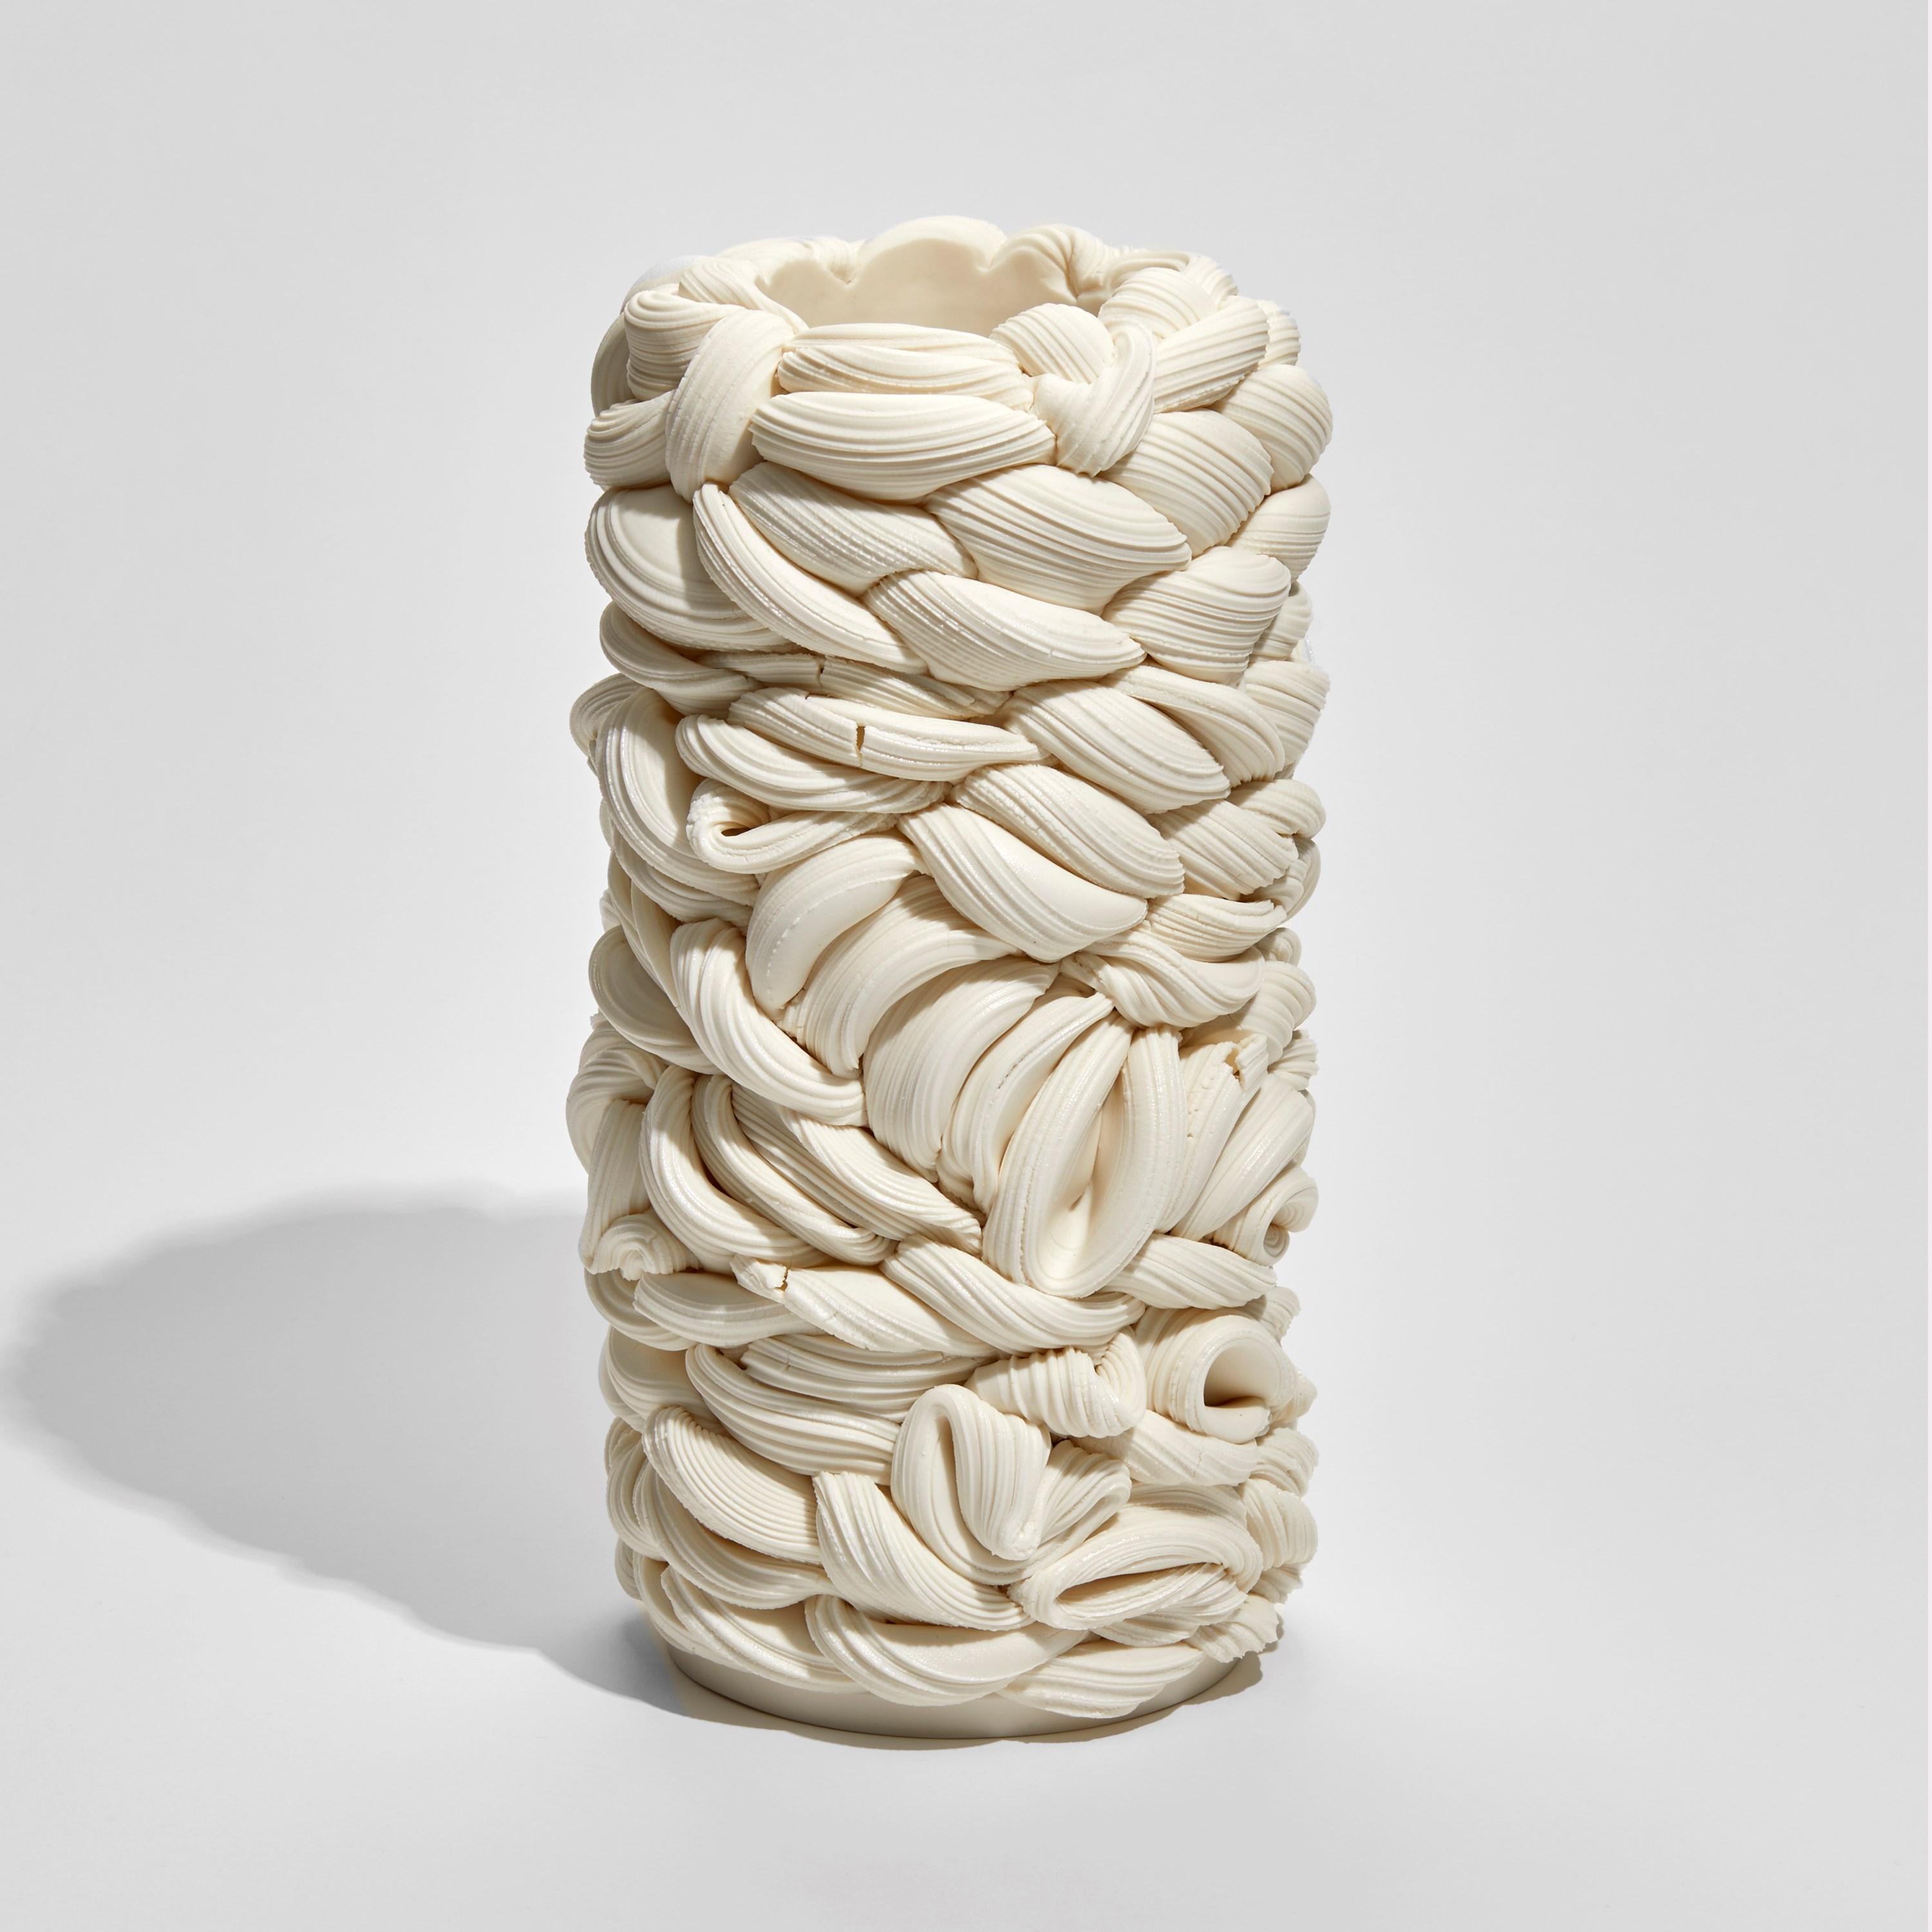 'Achromatic Fold in White II' is a unique sculpture by the British artist Steven Edwards, created from parian porcelain.

Steven Edwards is a ceramic artist whose work investigates the language of making through the materiality and physicality of